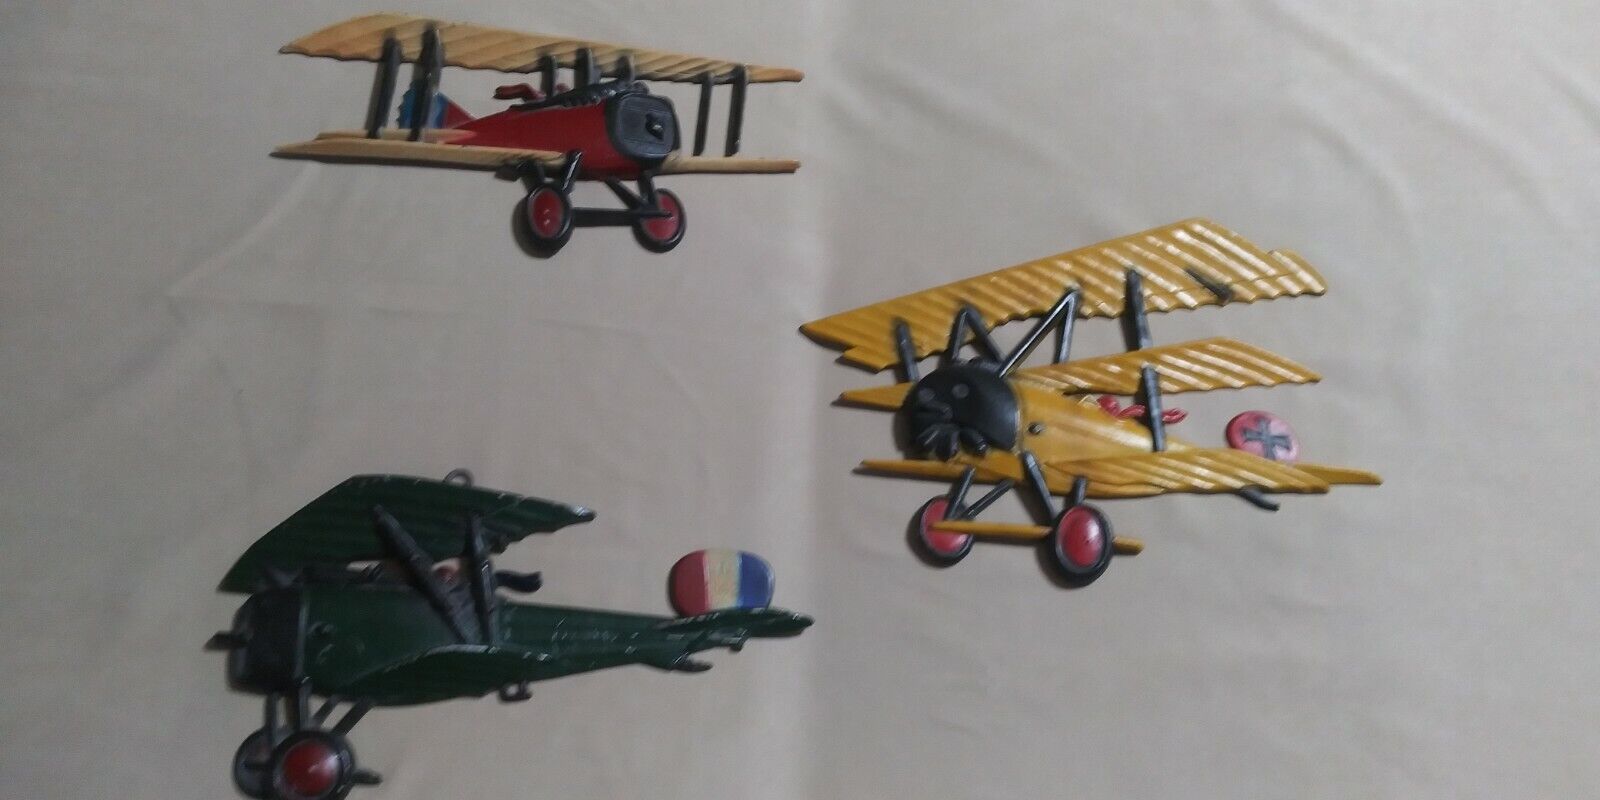 NICE VINTAGE CAST METAL AIRPLANES SET WALL DECOR BY SEXTON 1975